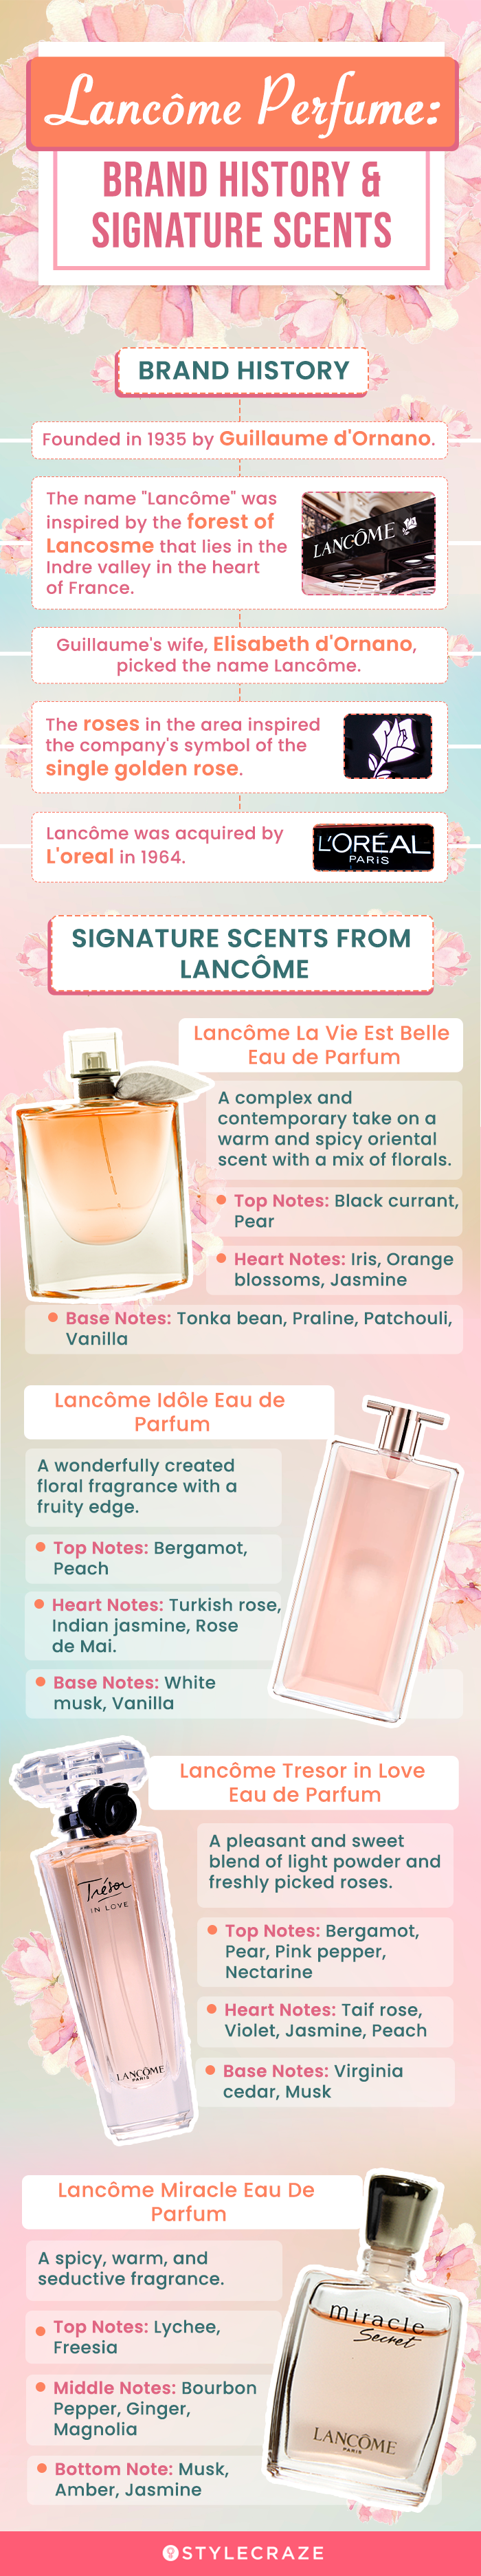 Lancôme Perfume: Brand History And Signature Scents (infographic)